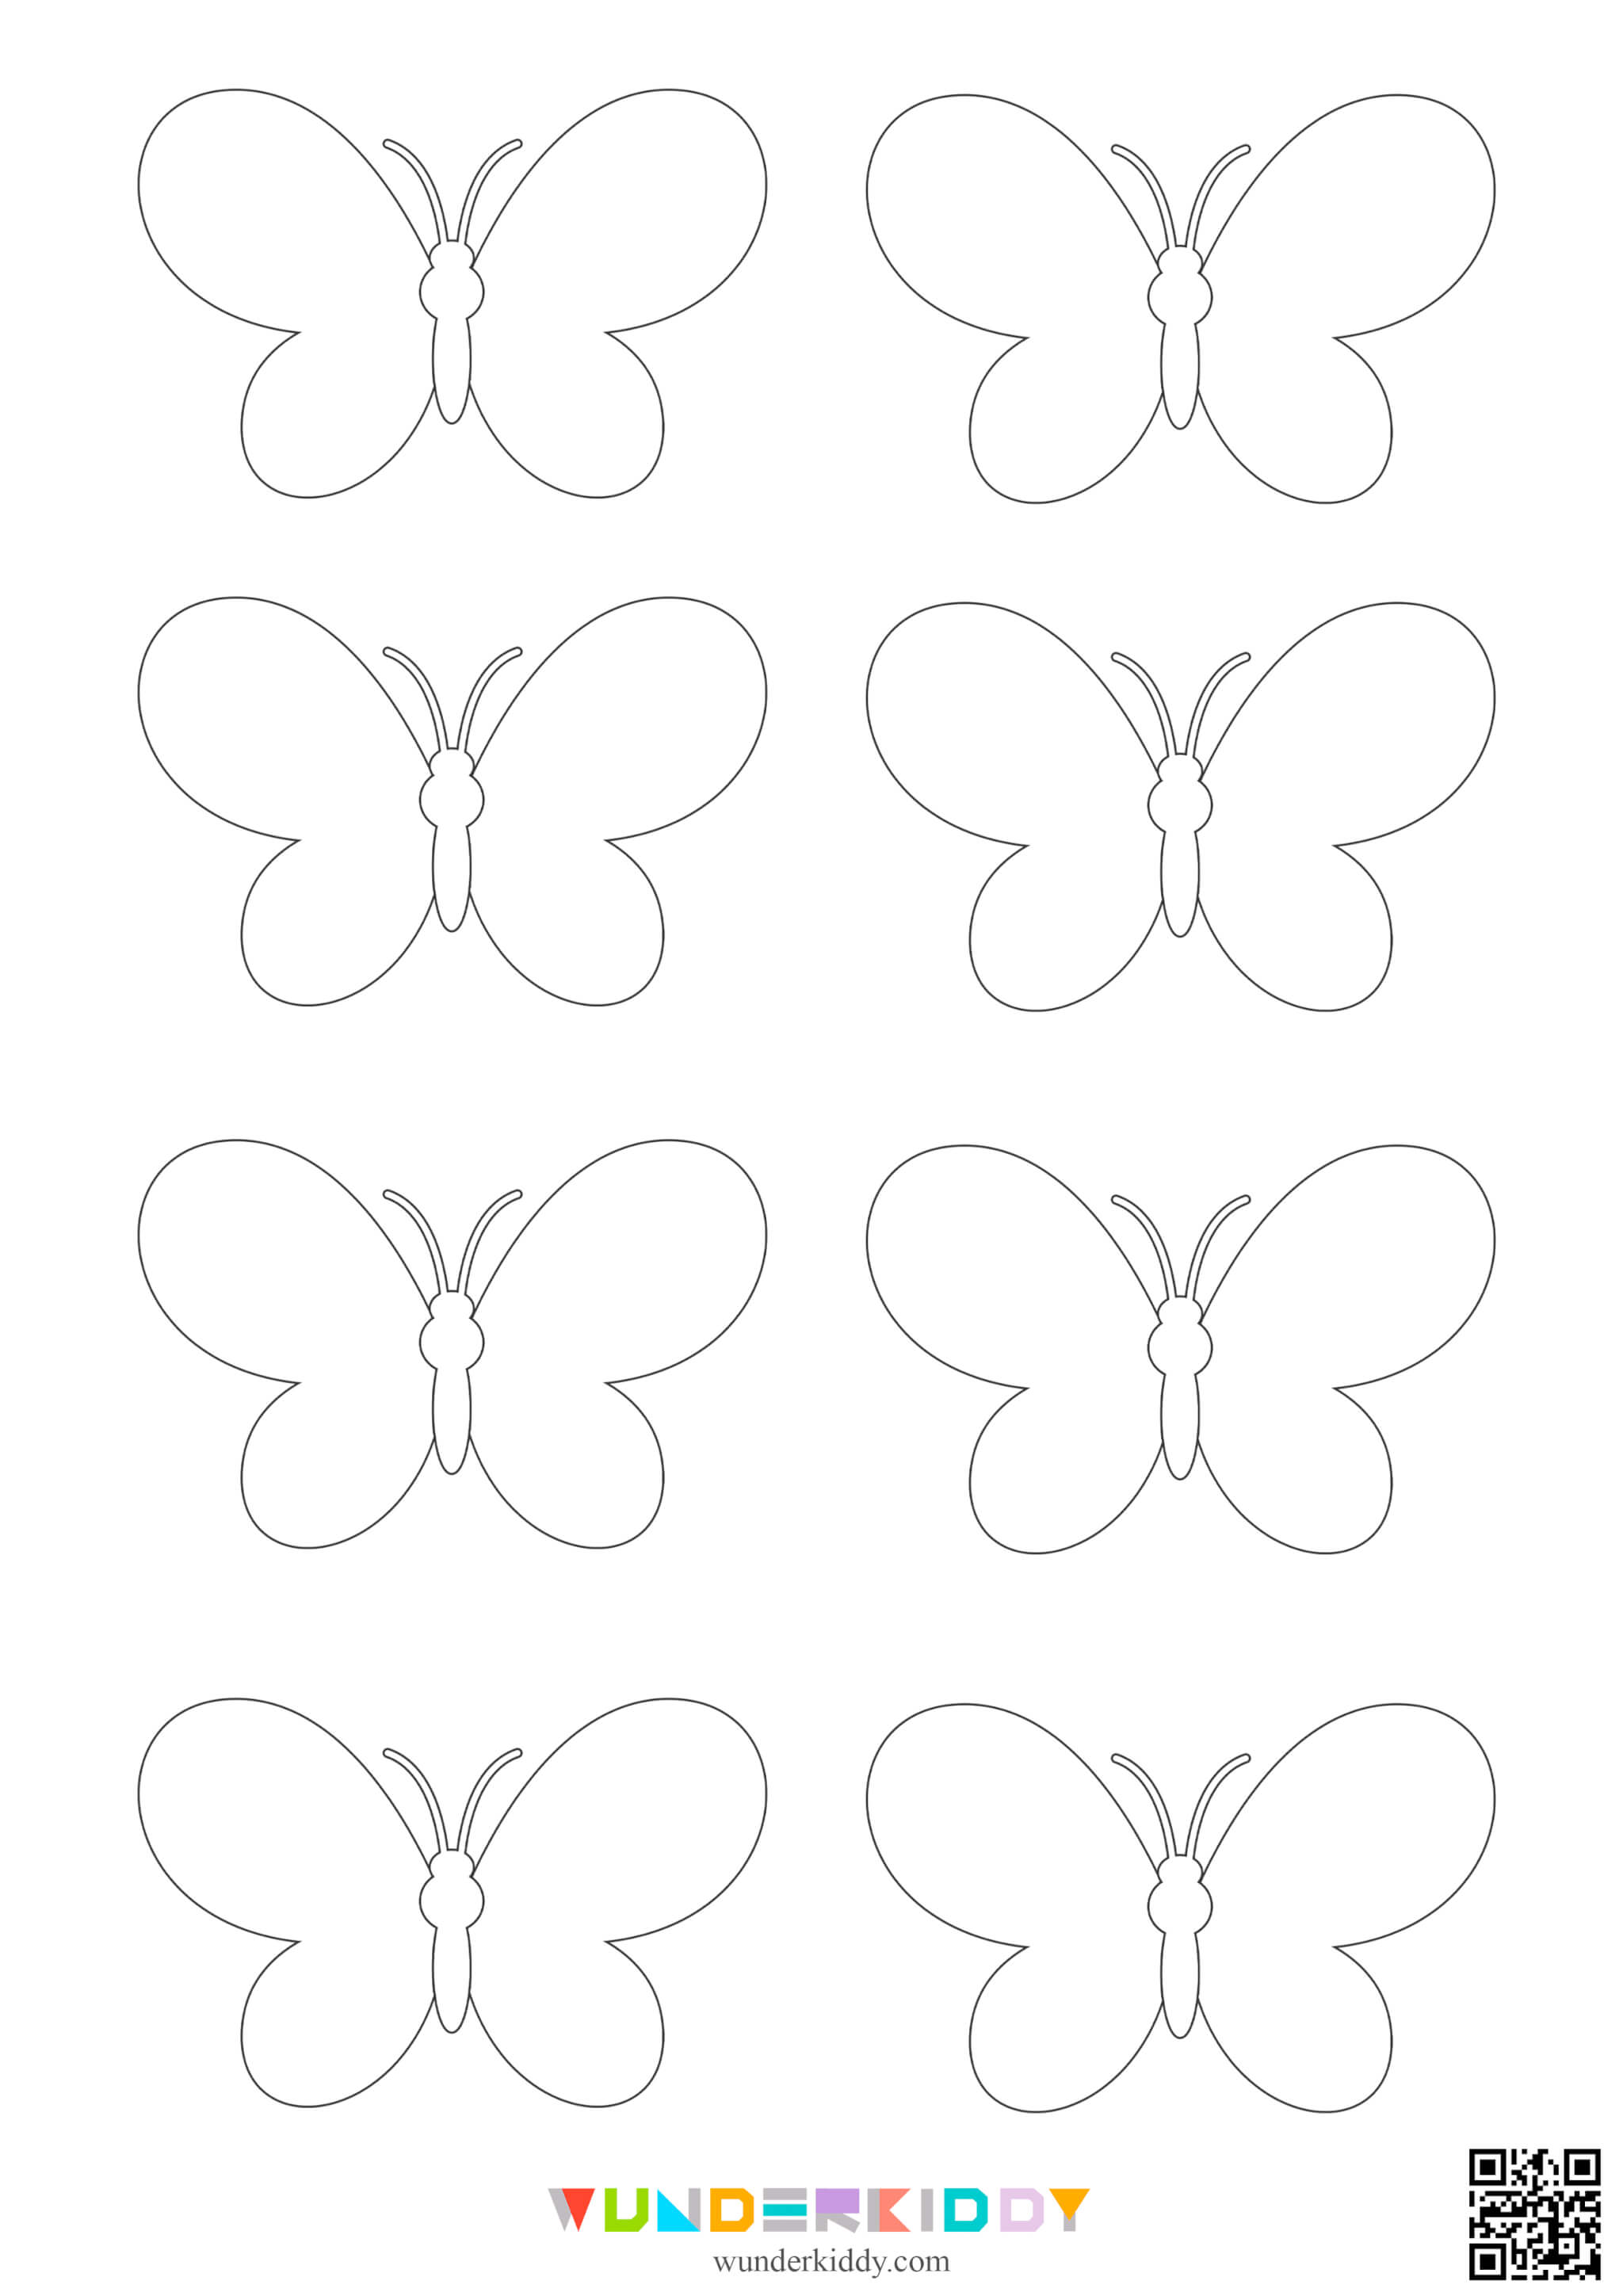 Template «Butterfly» - Image 10